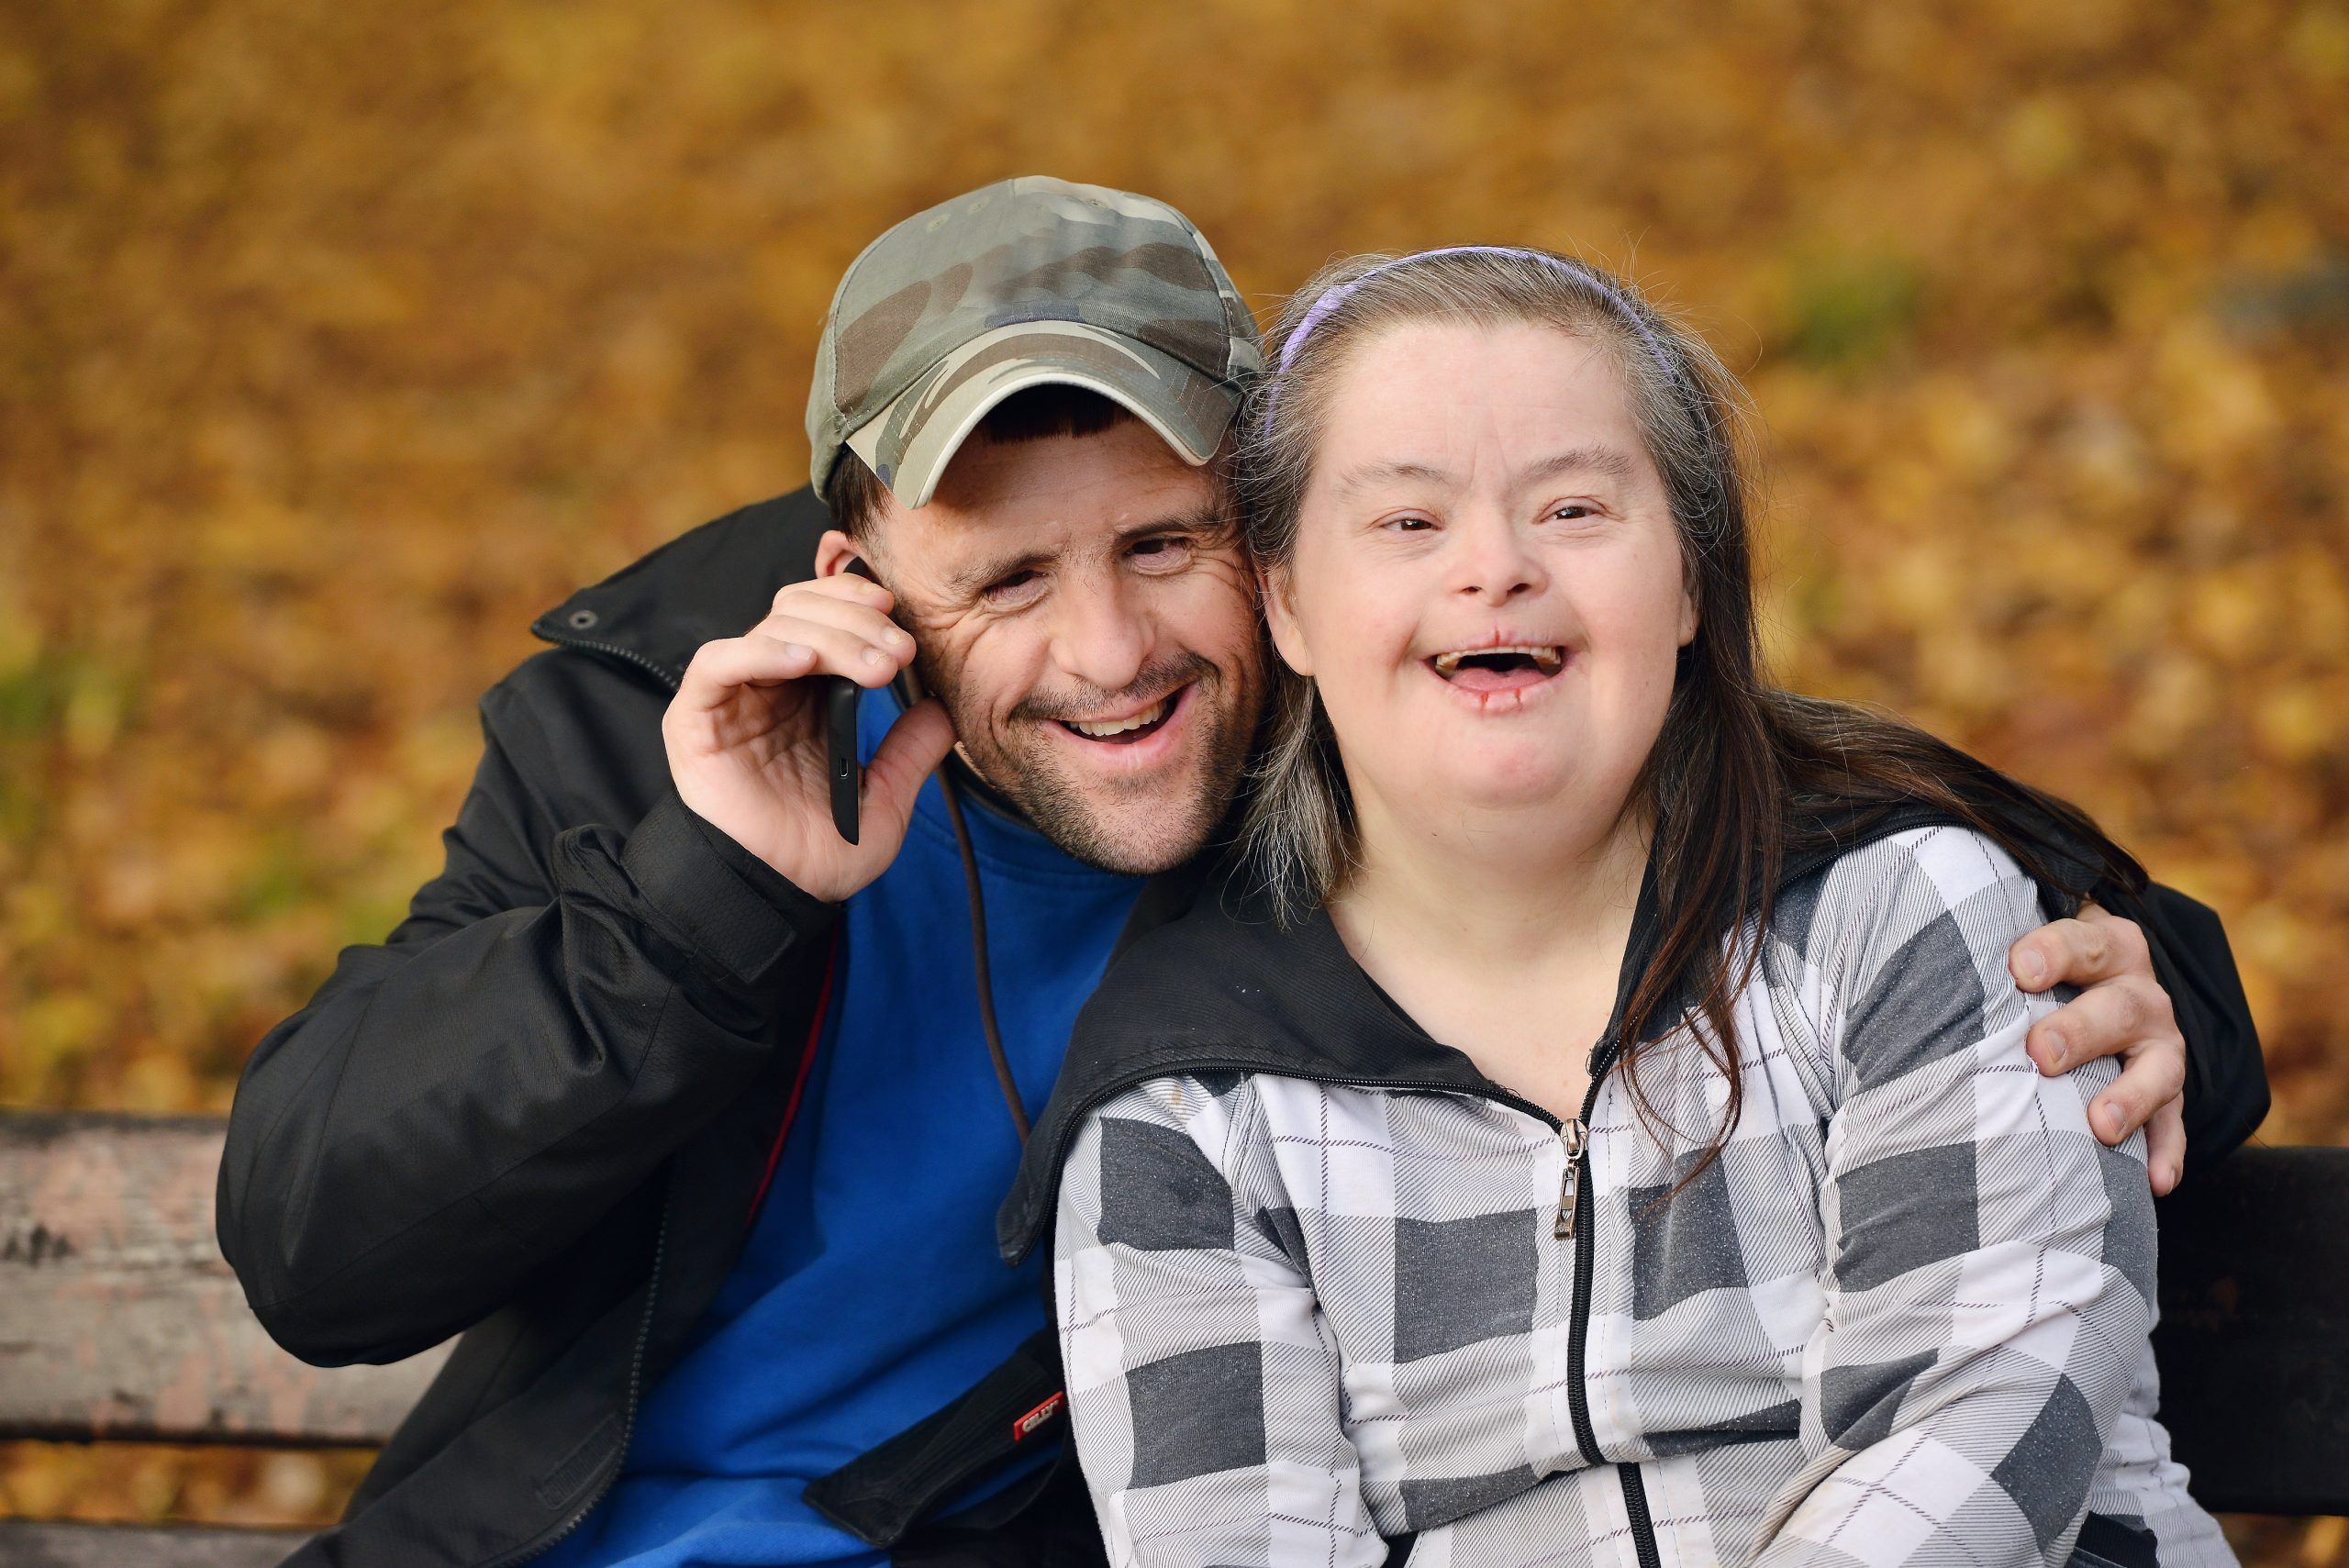 Many disabled people are facing difficulties maintaining and forming intimate relationships during COVID-19.